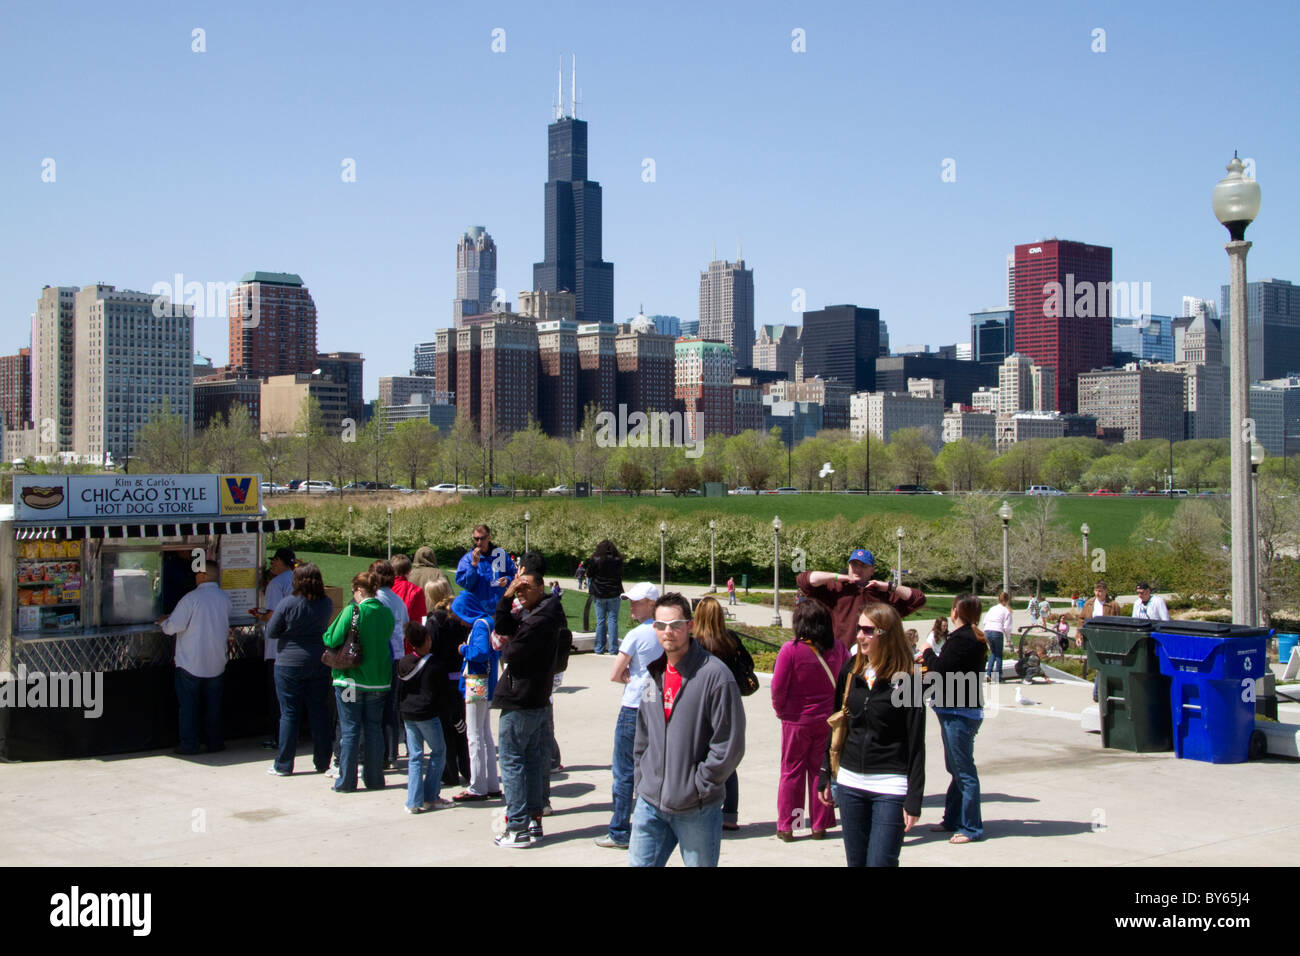 Hot dog vendor with Willis Tower in the background at Shedd Aquarium in Chicago, Illinois, USA. Stock Photo